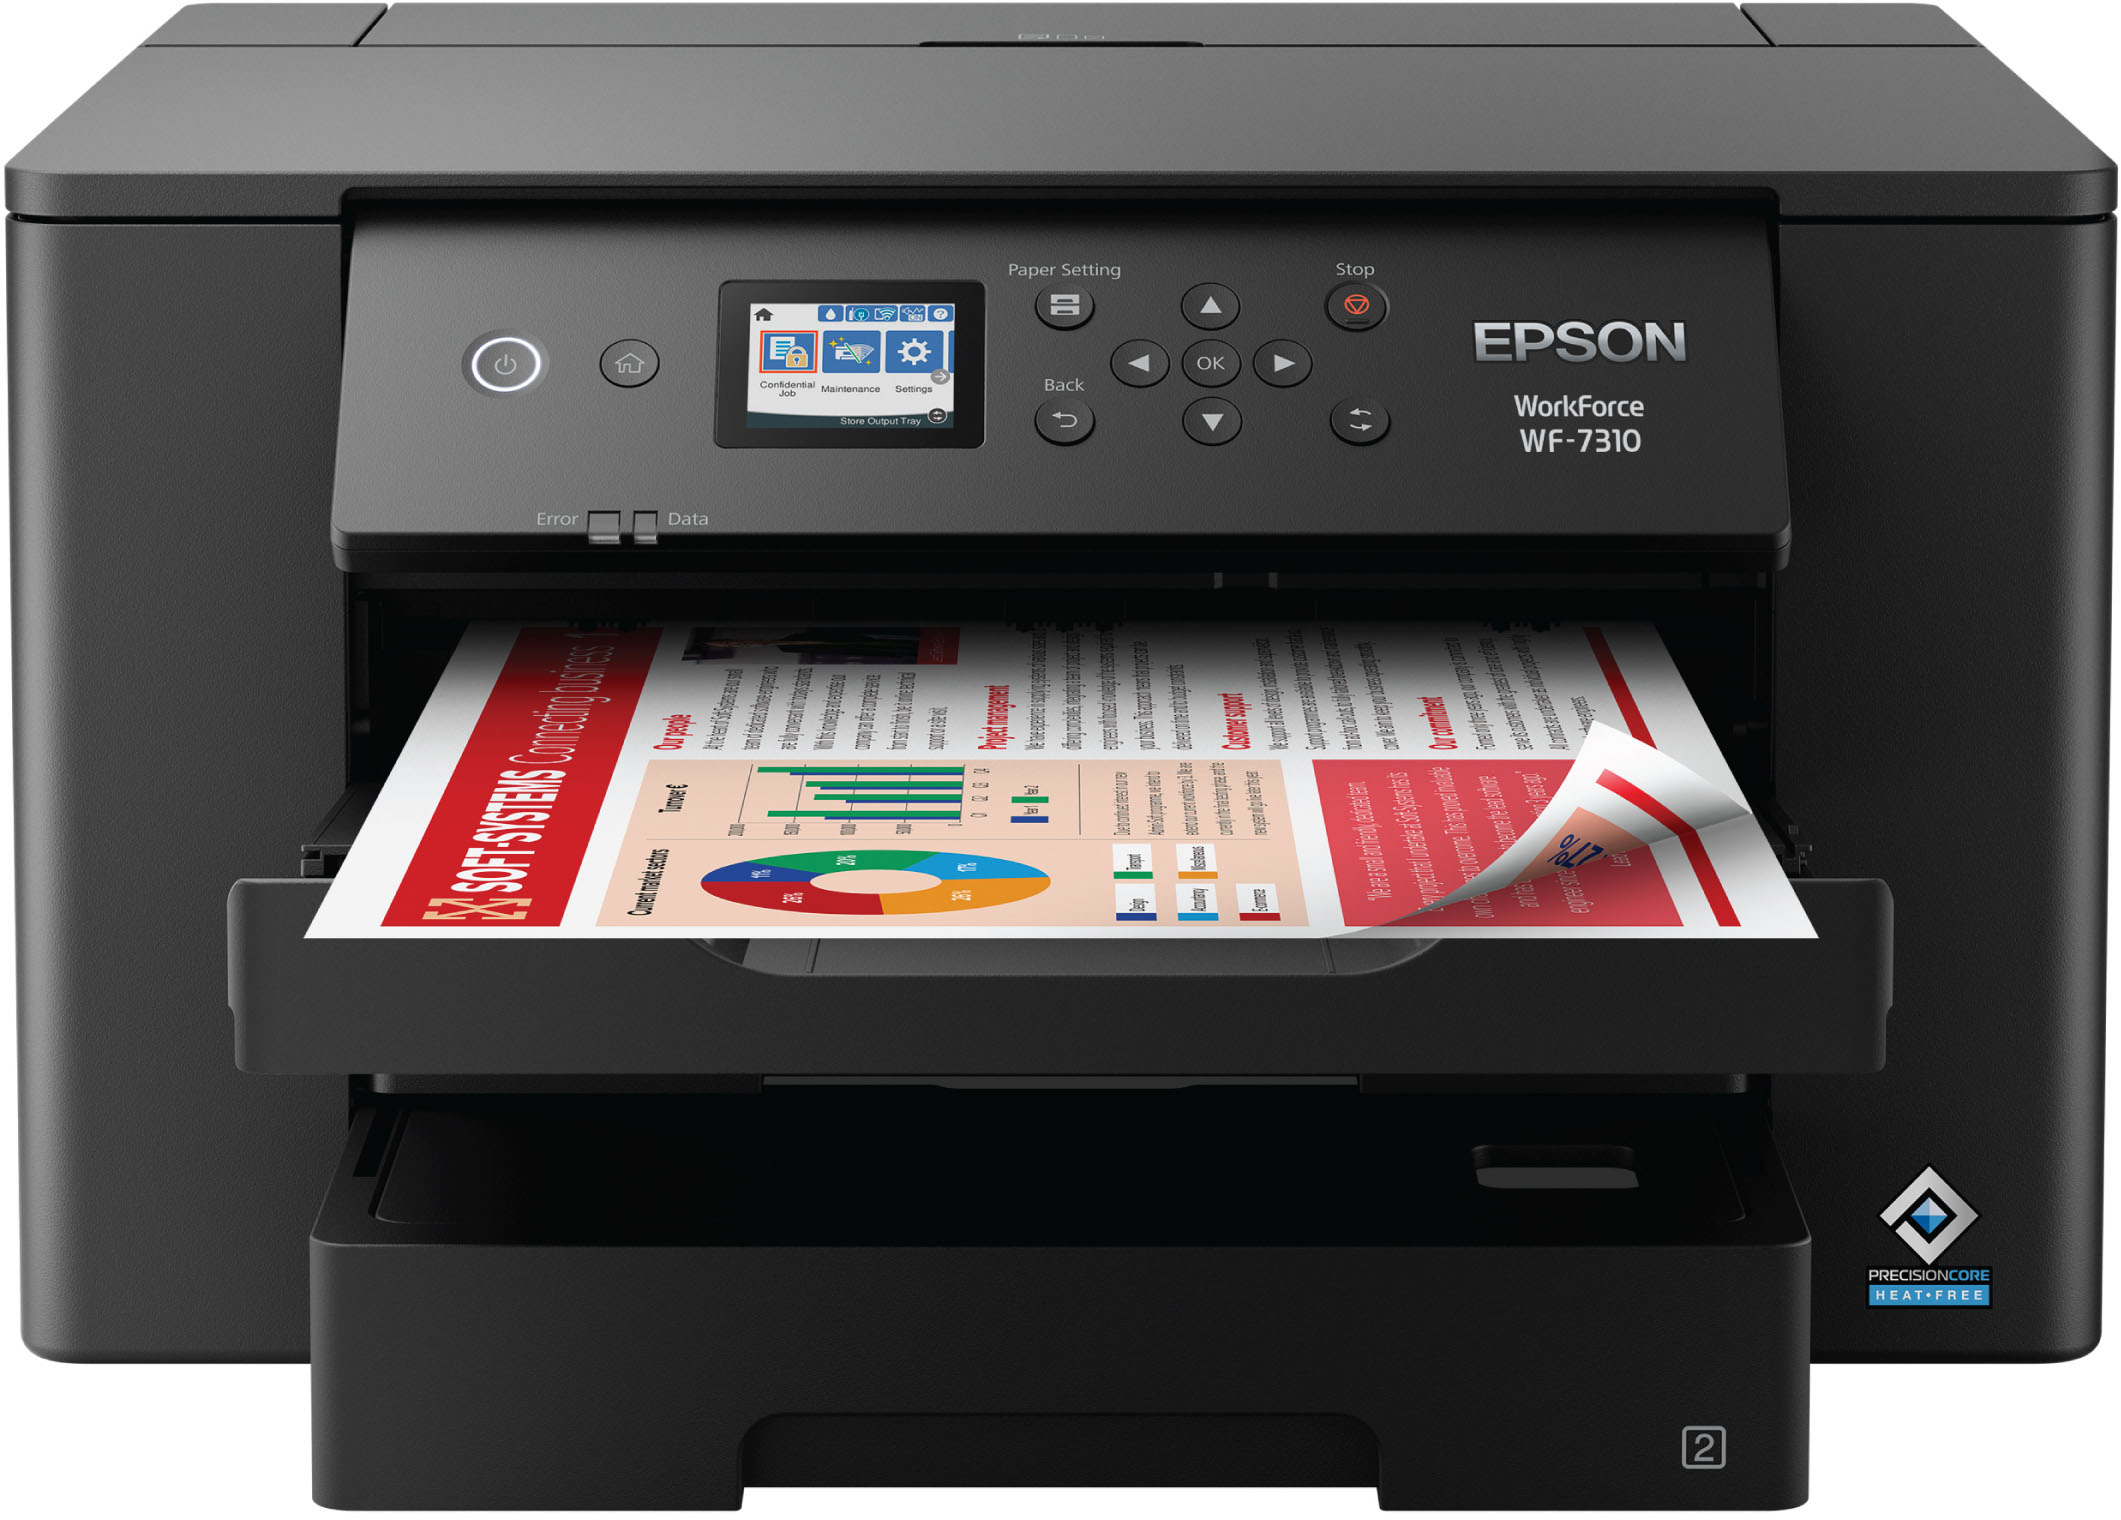 0010343962897 - EPSON WORKFORCE PRO WF-7310 WIRELESS WIDE-FORMAT PRINTER WITH PRINT UP TO 13 X 19, AUTO 2-SIDED PRINTING UP TO 11 X 17, 500-SHEET CAPACITY, 2.4 COLOR DISPLAY, EPSON SMART PANEL APP